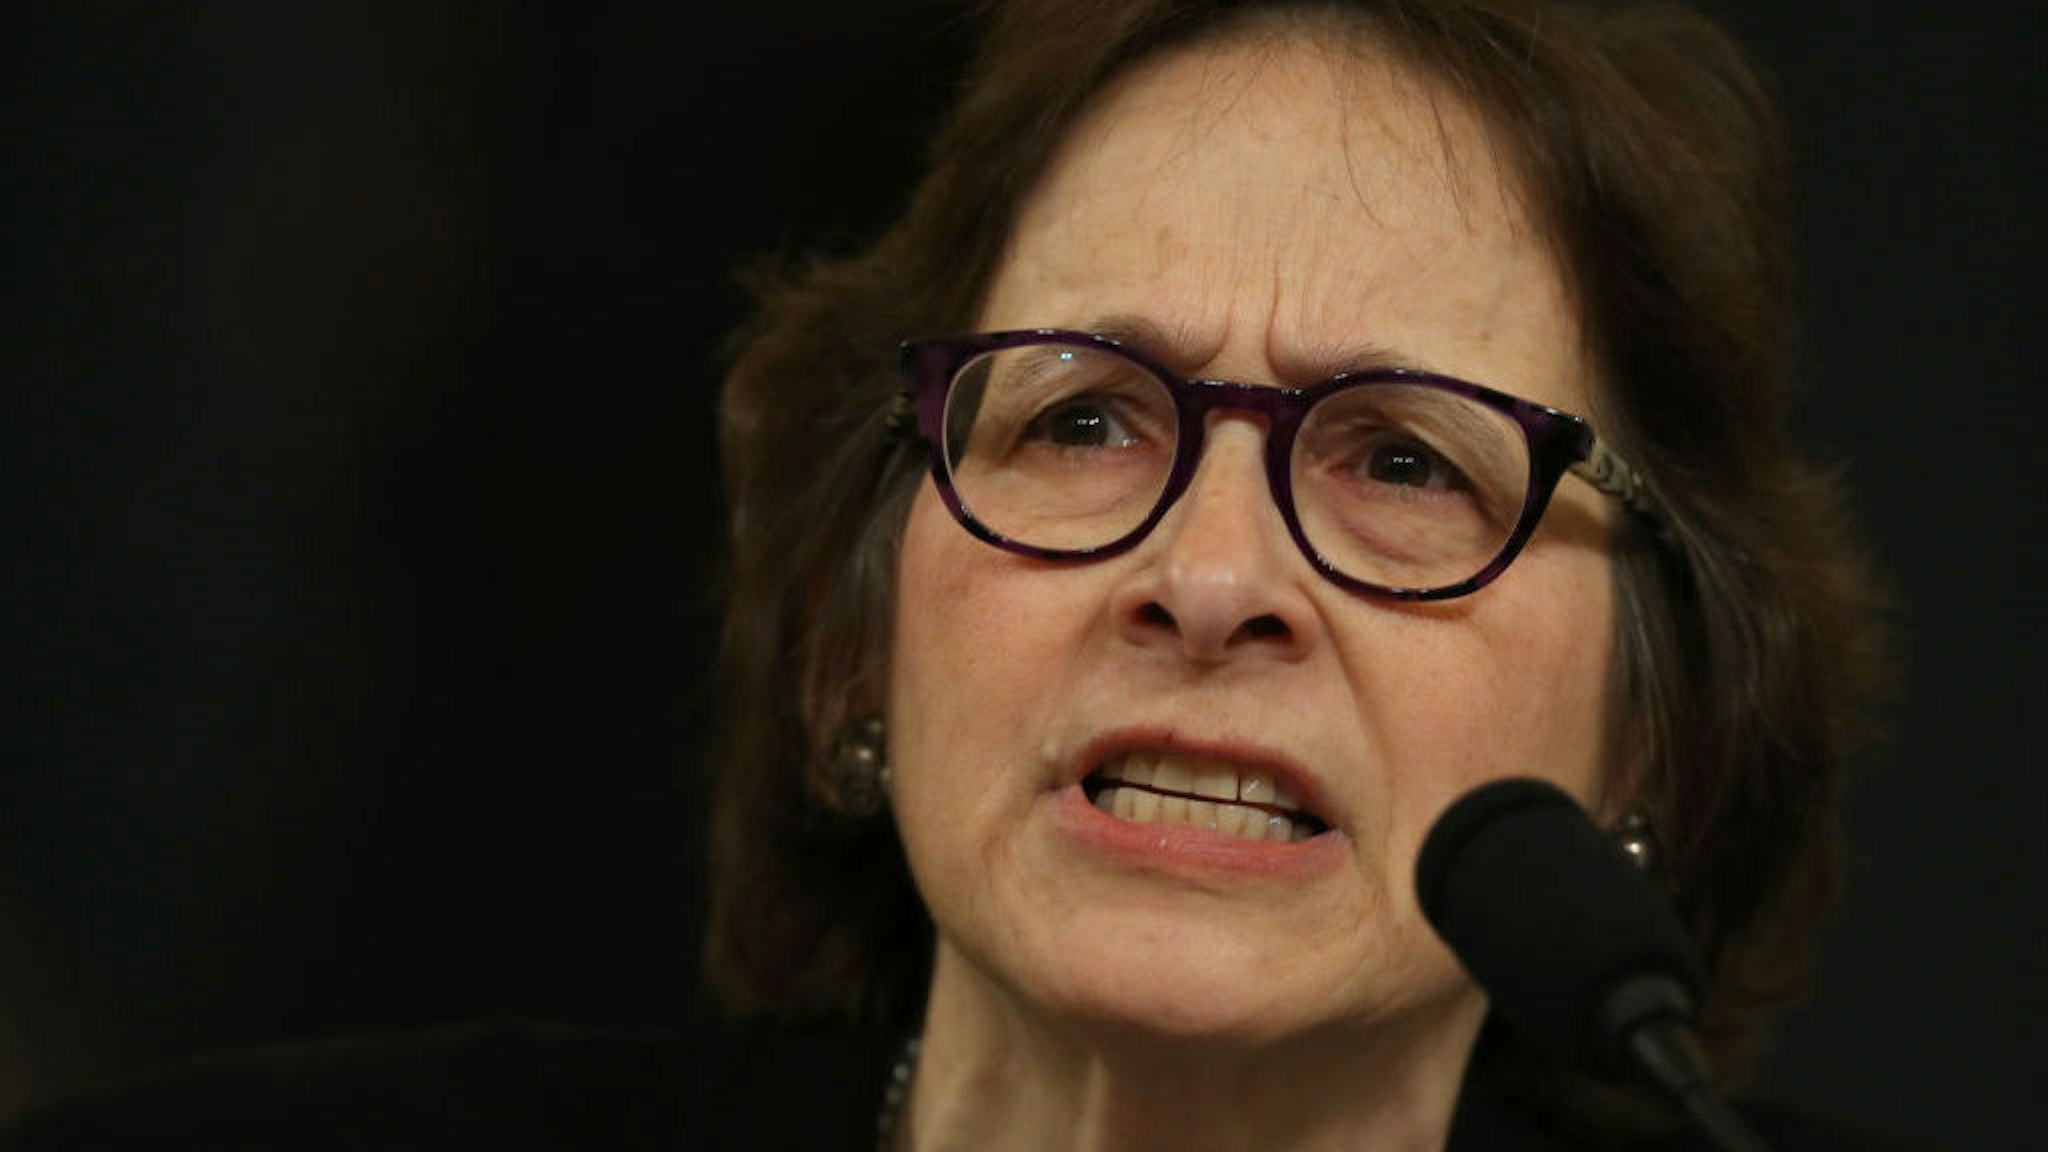 WASHINGTON, DC – DECEMBER 4: Constitutional scholar Pamela Karlan of Stanford University testifies before the House Judiciary Committee in the Longworth House Office Building on Capitol Hill December 4, 2019 in Washington, DC. This is the first hearing held by the Judiciary Committee in the impeachment inquiry against U.S. President Donald Trump, whom House Democrats say held back military aid for Ukraine while demanding it investigate his political rivals. The Judiciary Committee will decide whether to draft official articles of impeachment against President Trump to be voted on by the full House of Representatives. (Photo by Chip Somodevilla/Getty Images)